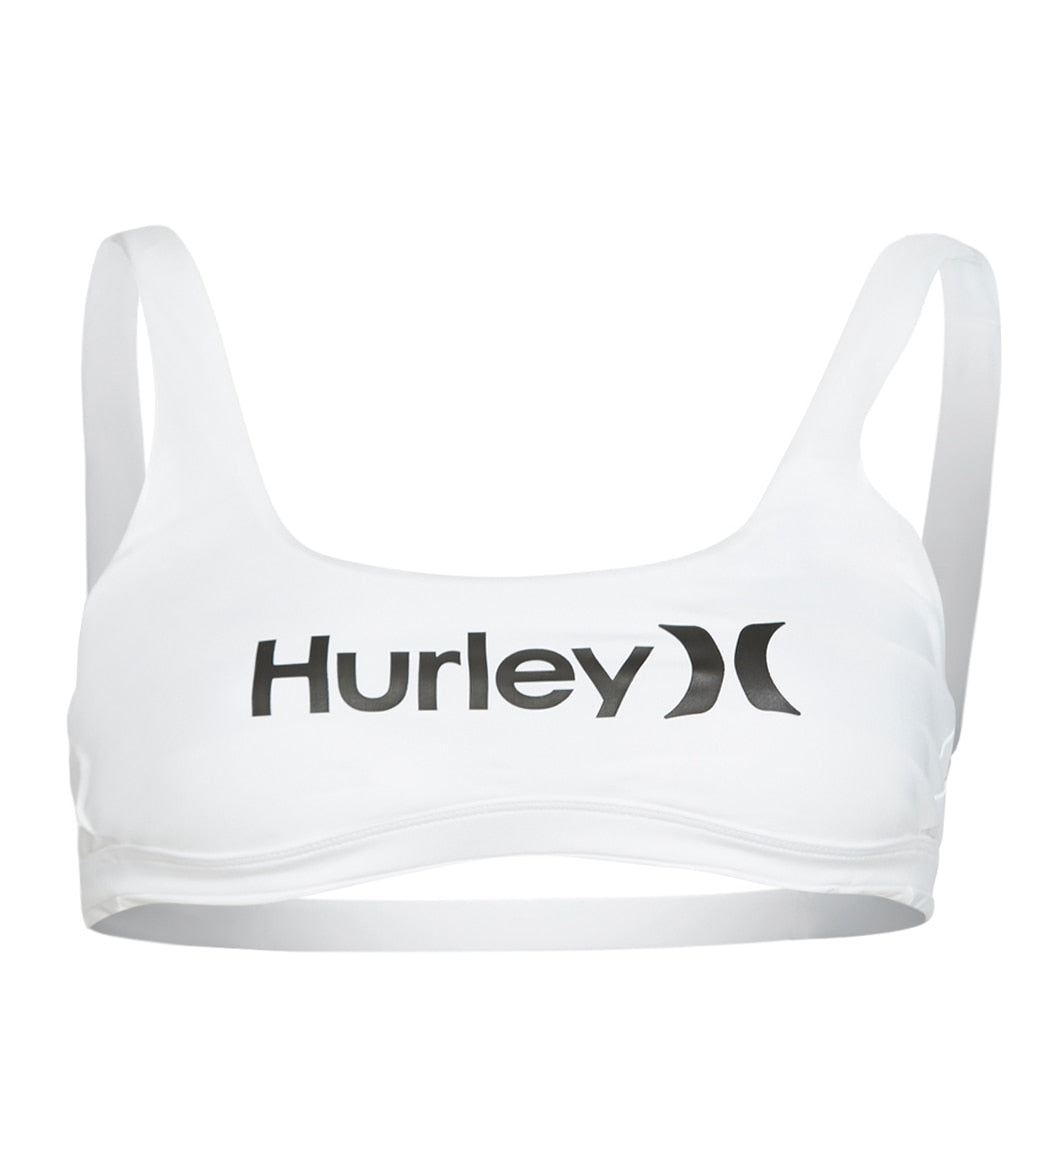 Hurley Women's Quick Dry One And Only Reversible Surf Top - White Medium - Swimoutlet.com